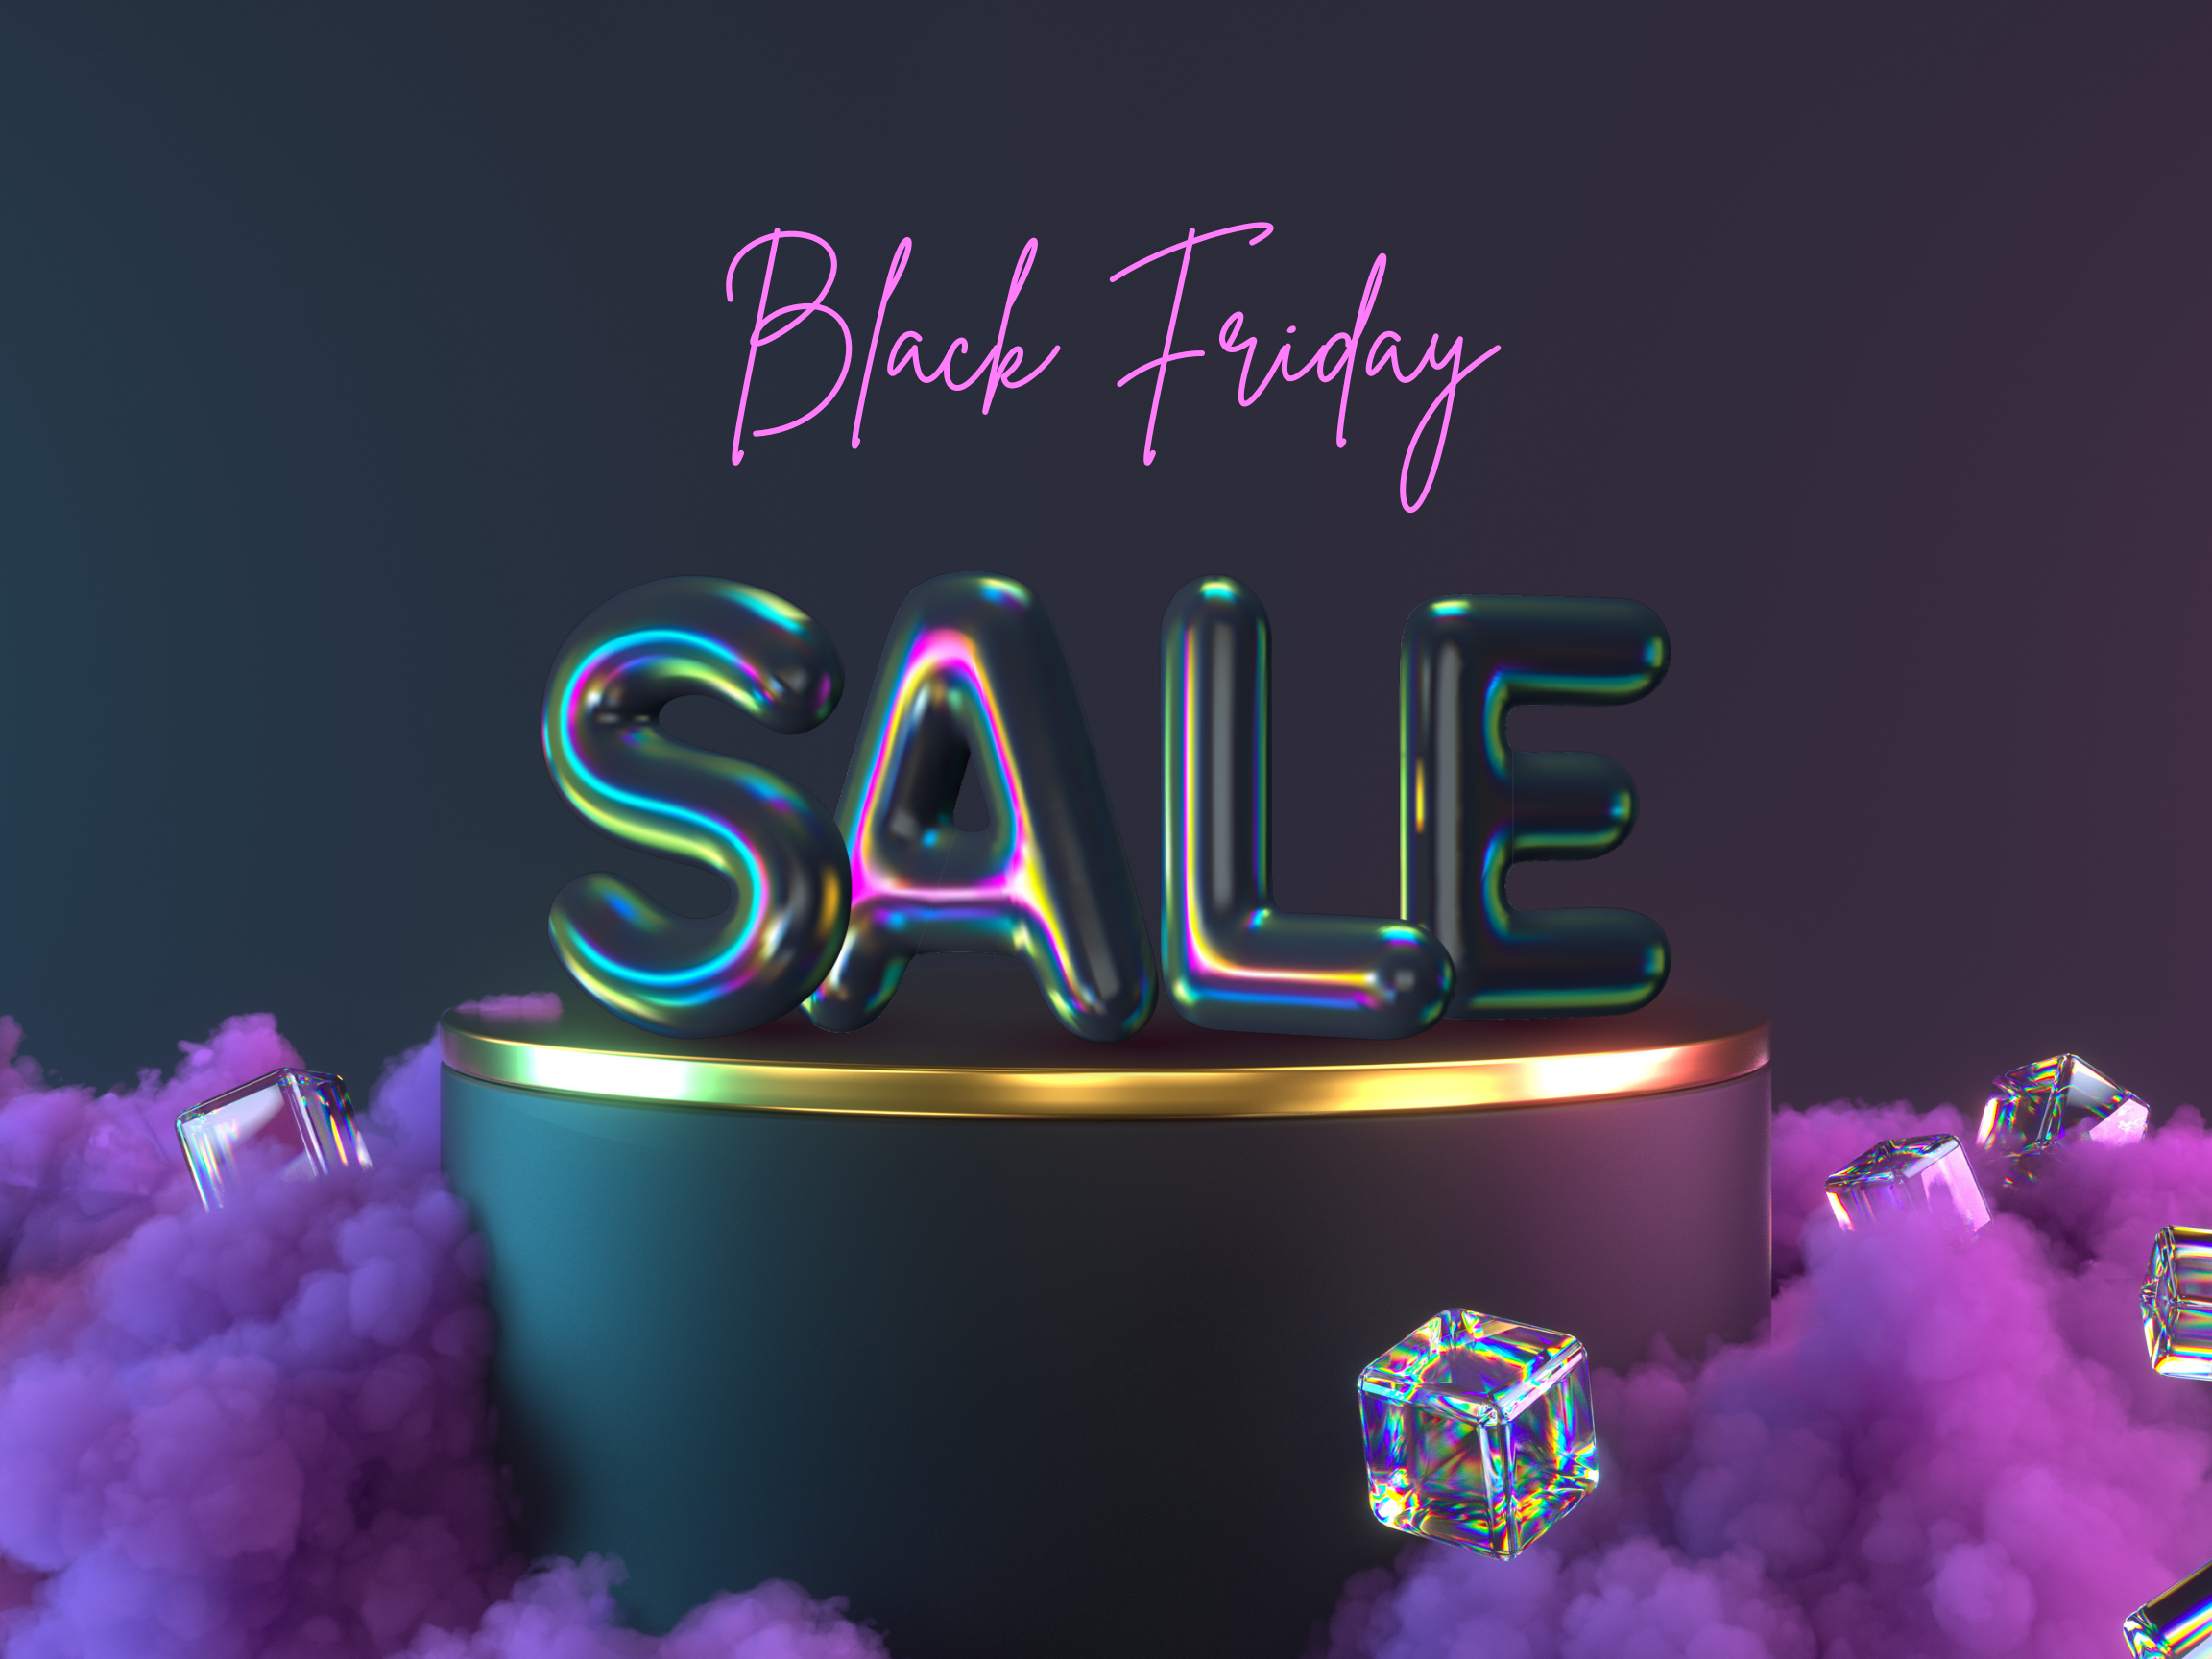 The Wait is OVER – Black Friday Deals 2022 are On